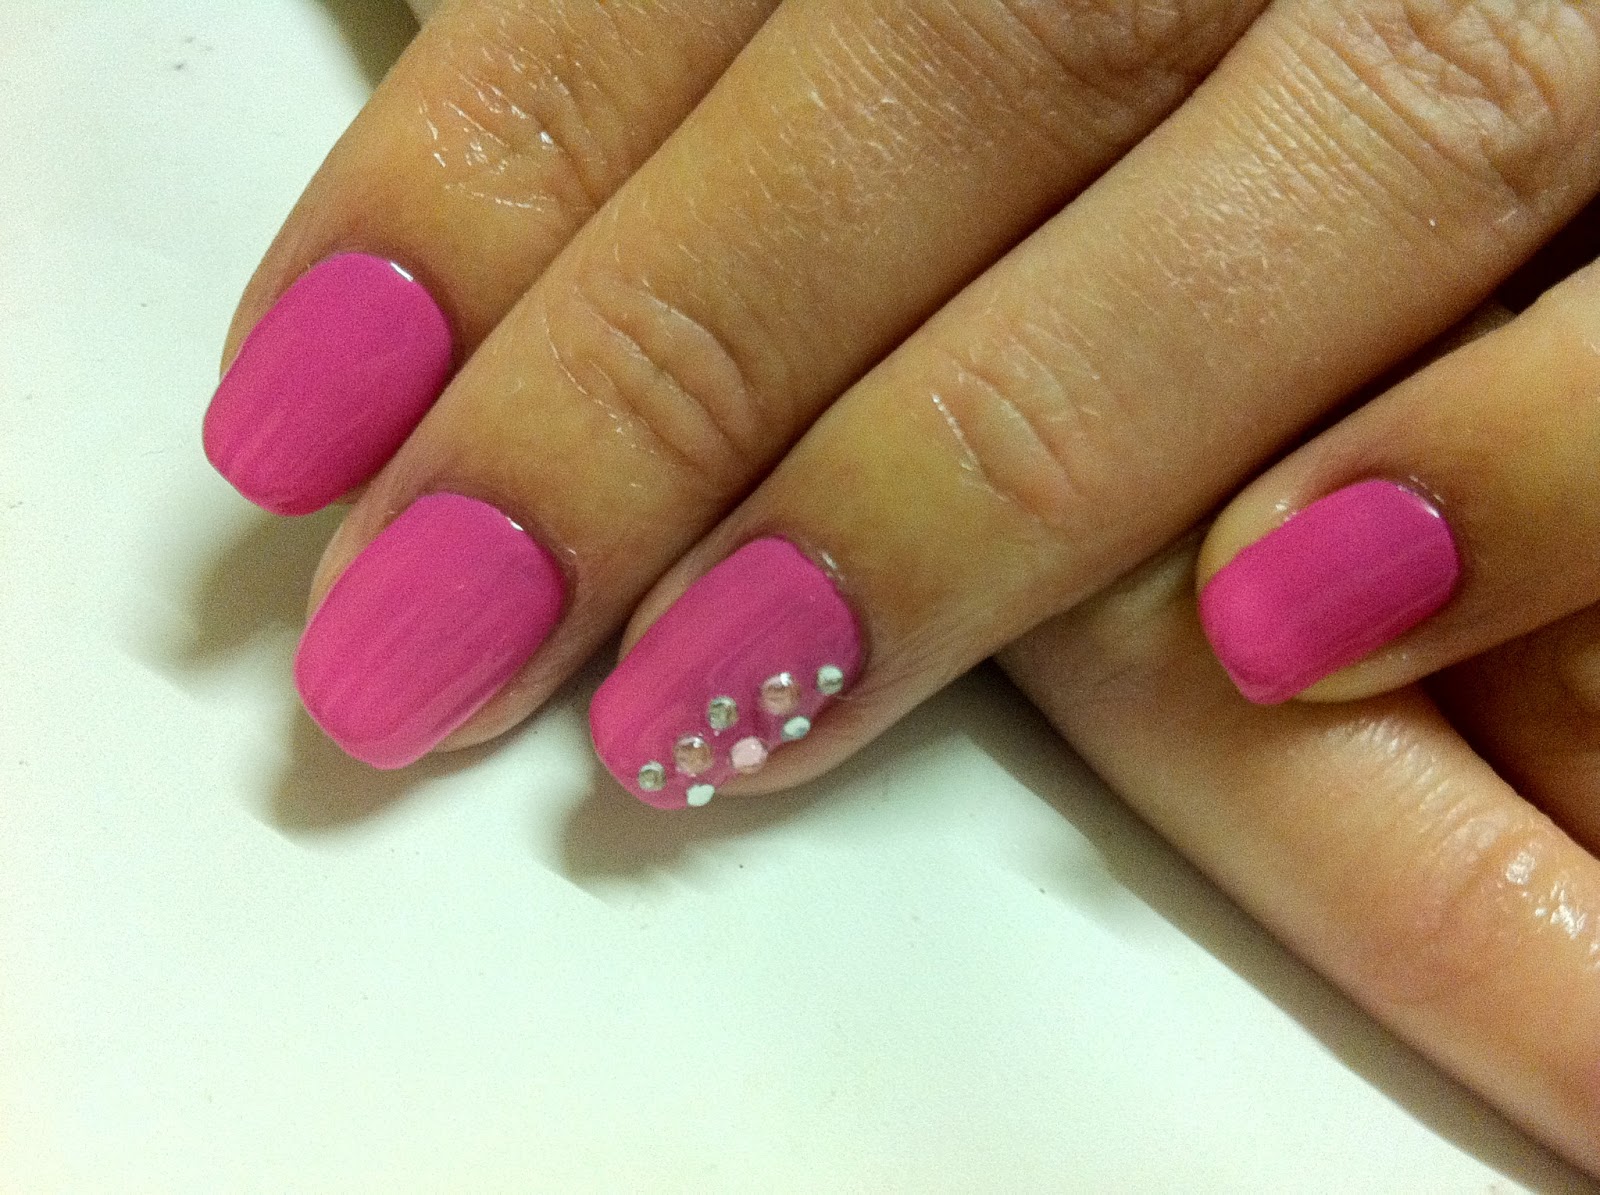 Brush up and Polish up!: CND Shellac - Hot Pop Pink and Diamantés